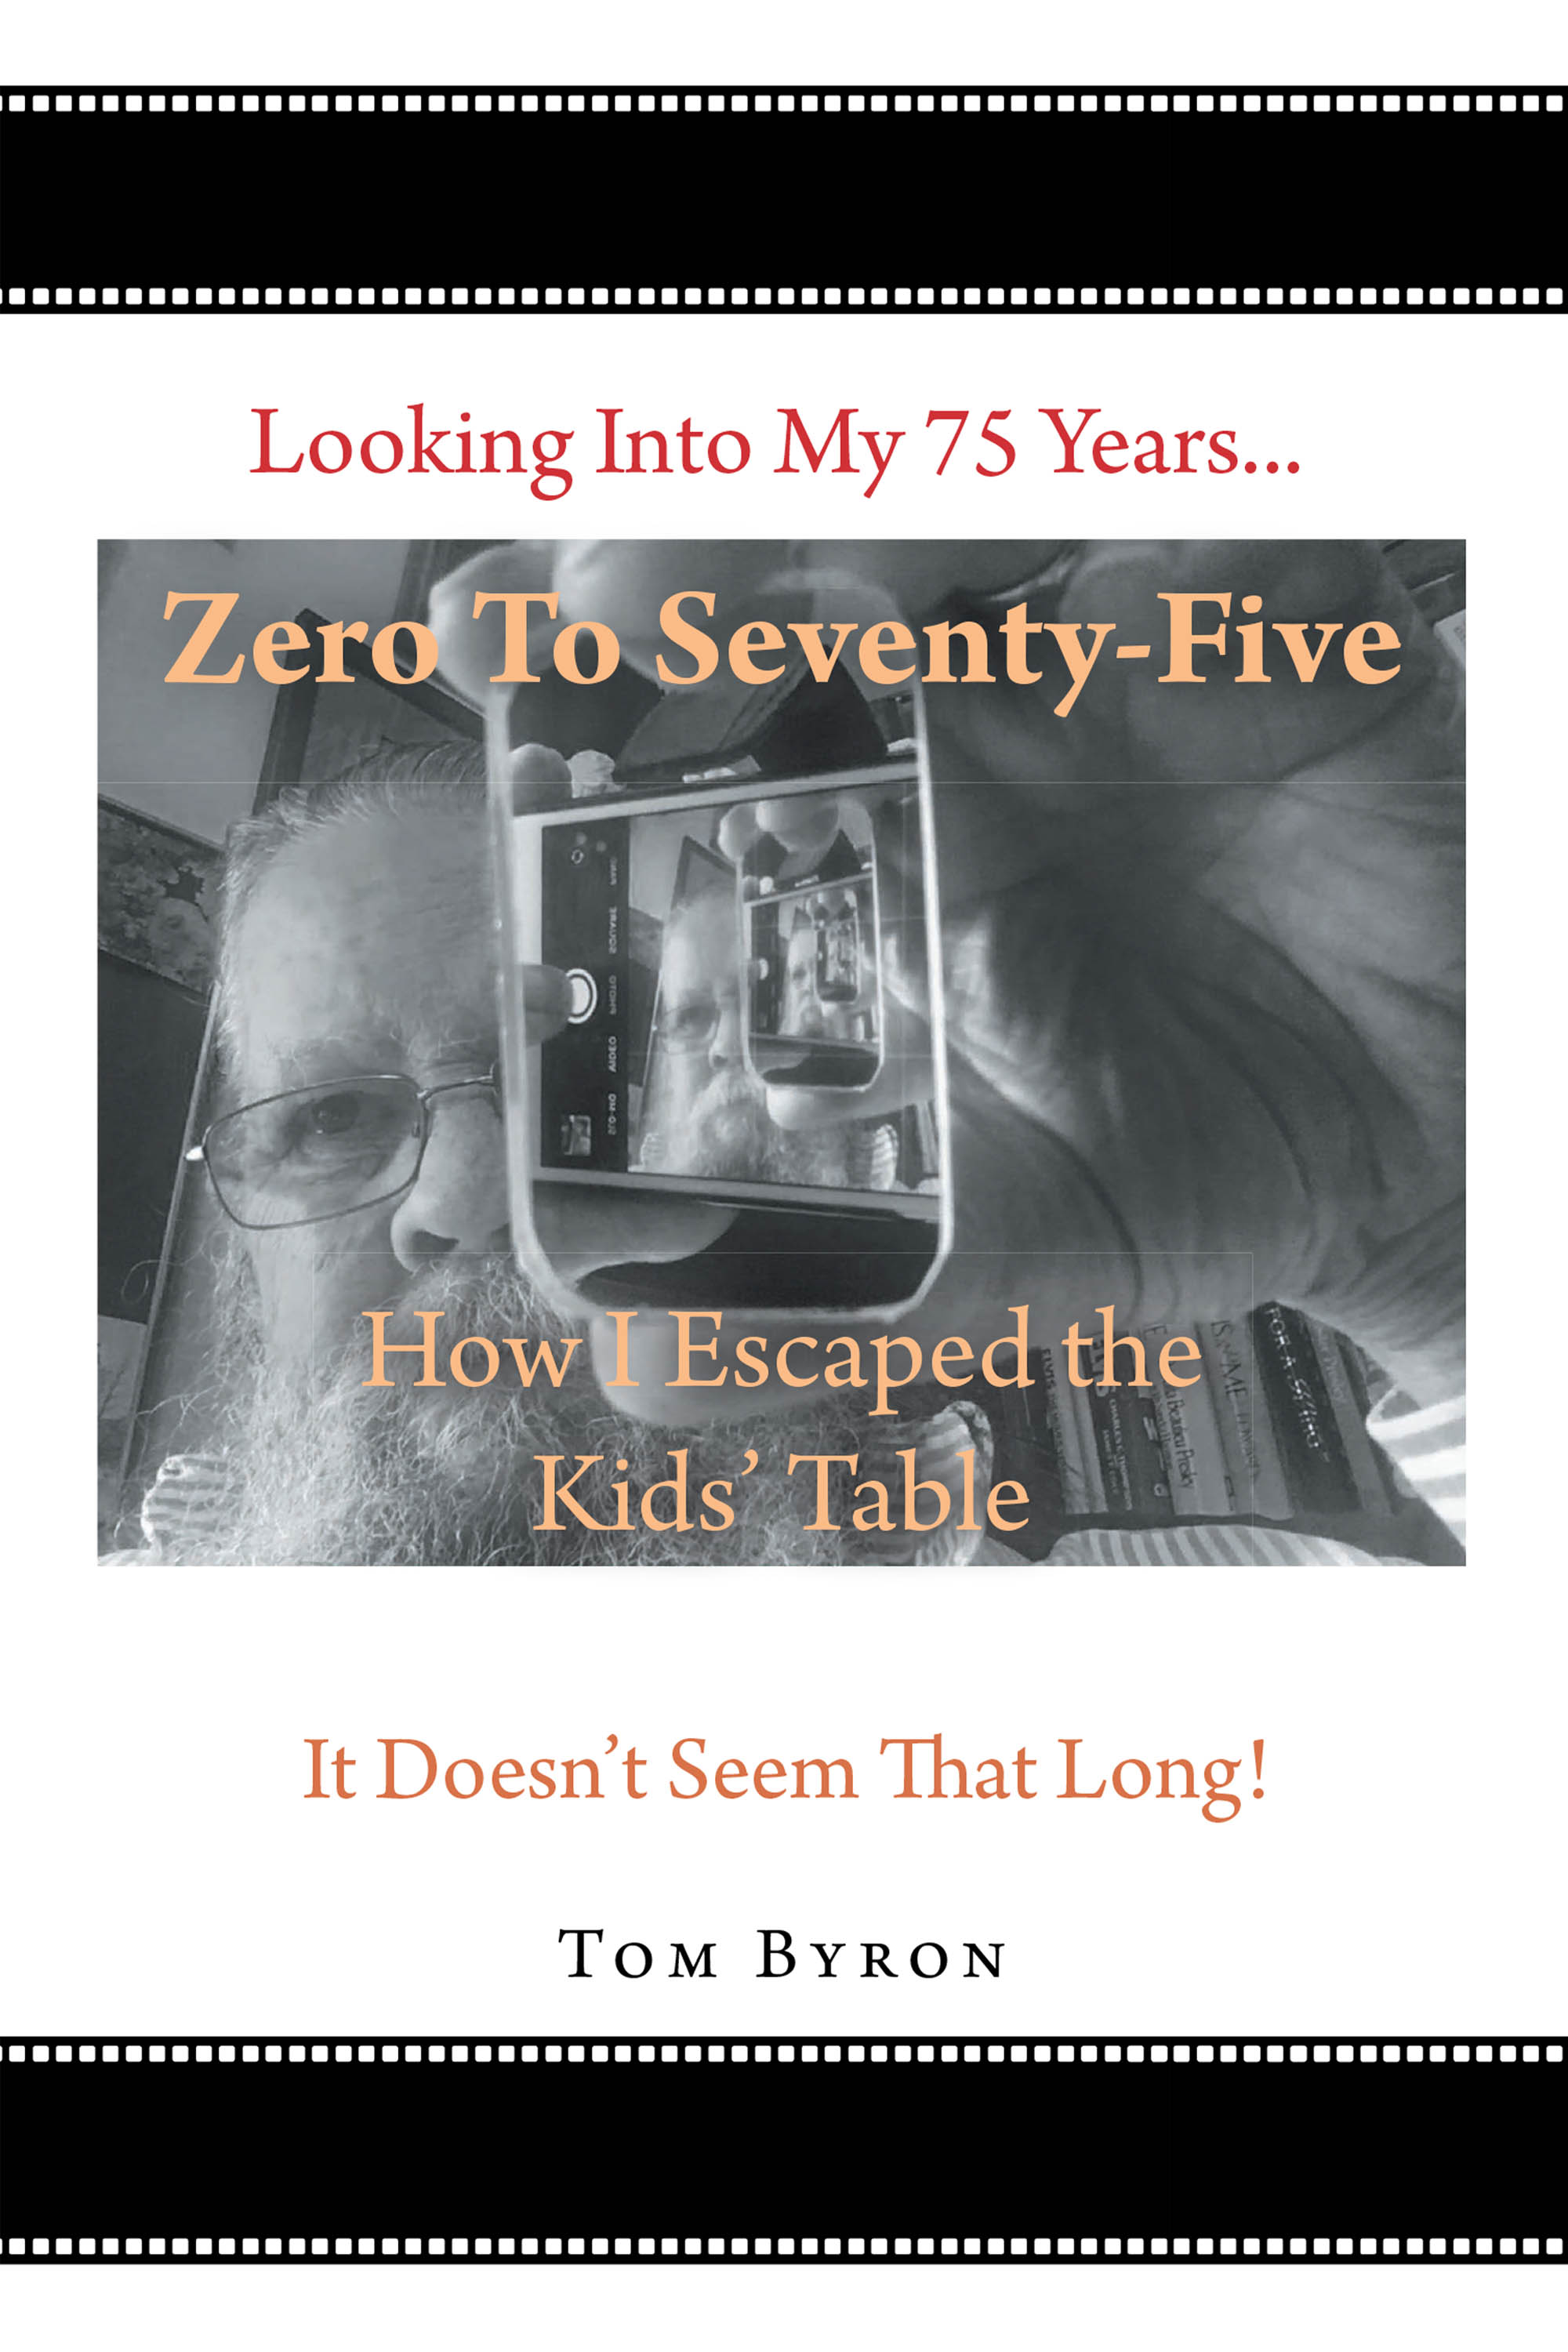 Author Tom Byron’s New Book, "Zero to Seventy-Five: How I Escaped the Kids’ Table," is a Compelling and Unique Personal Memoir Featuring Insightful Images